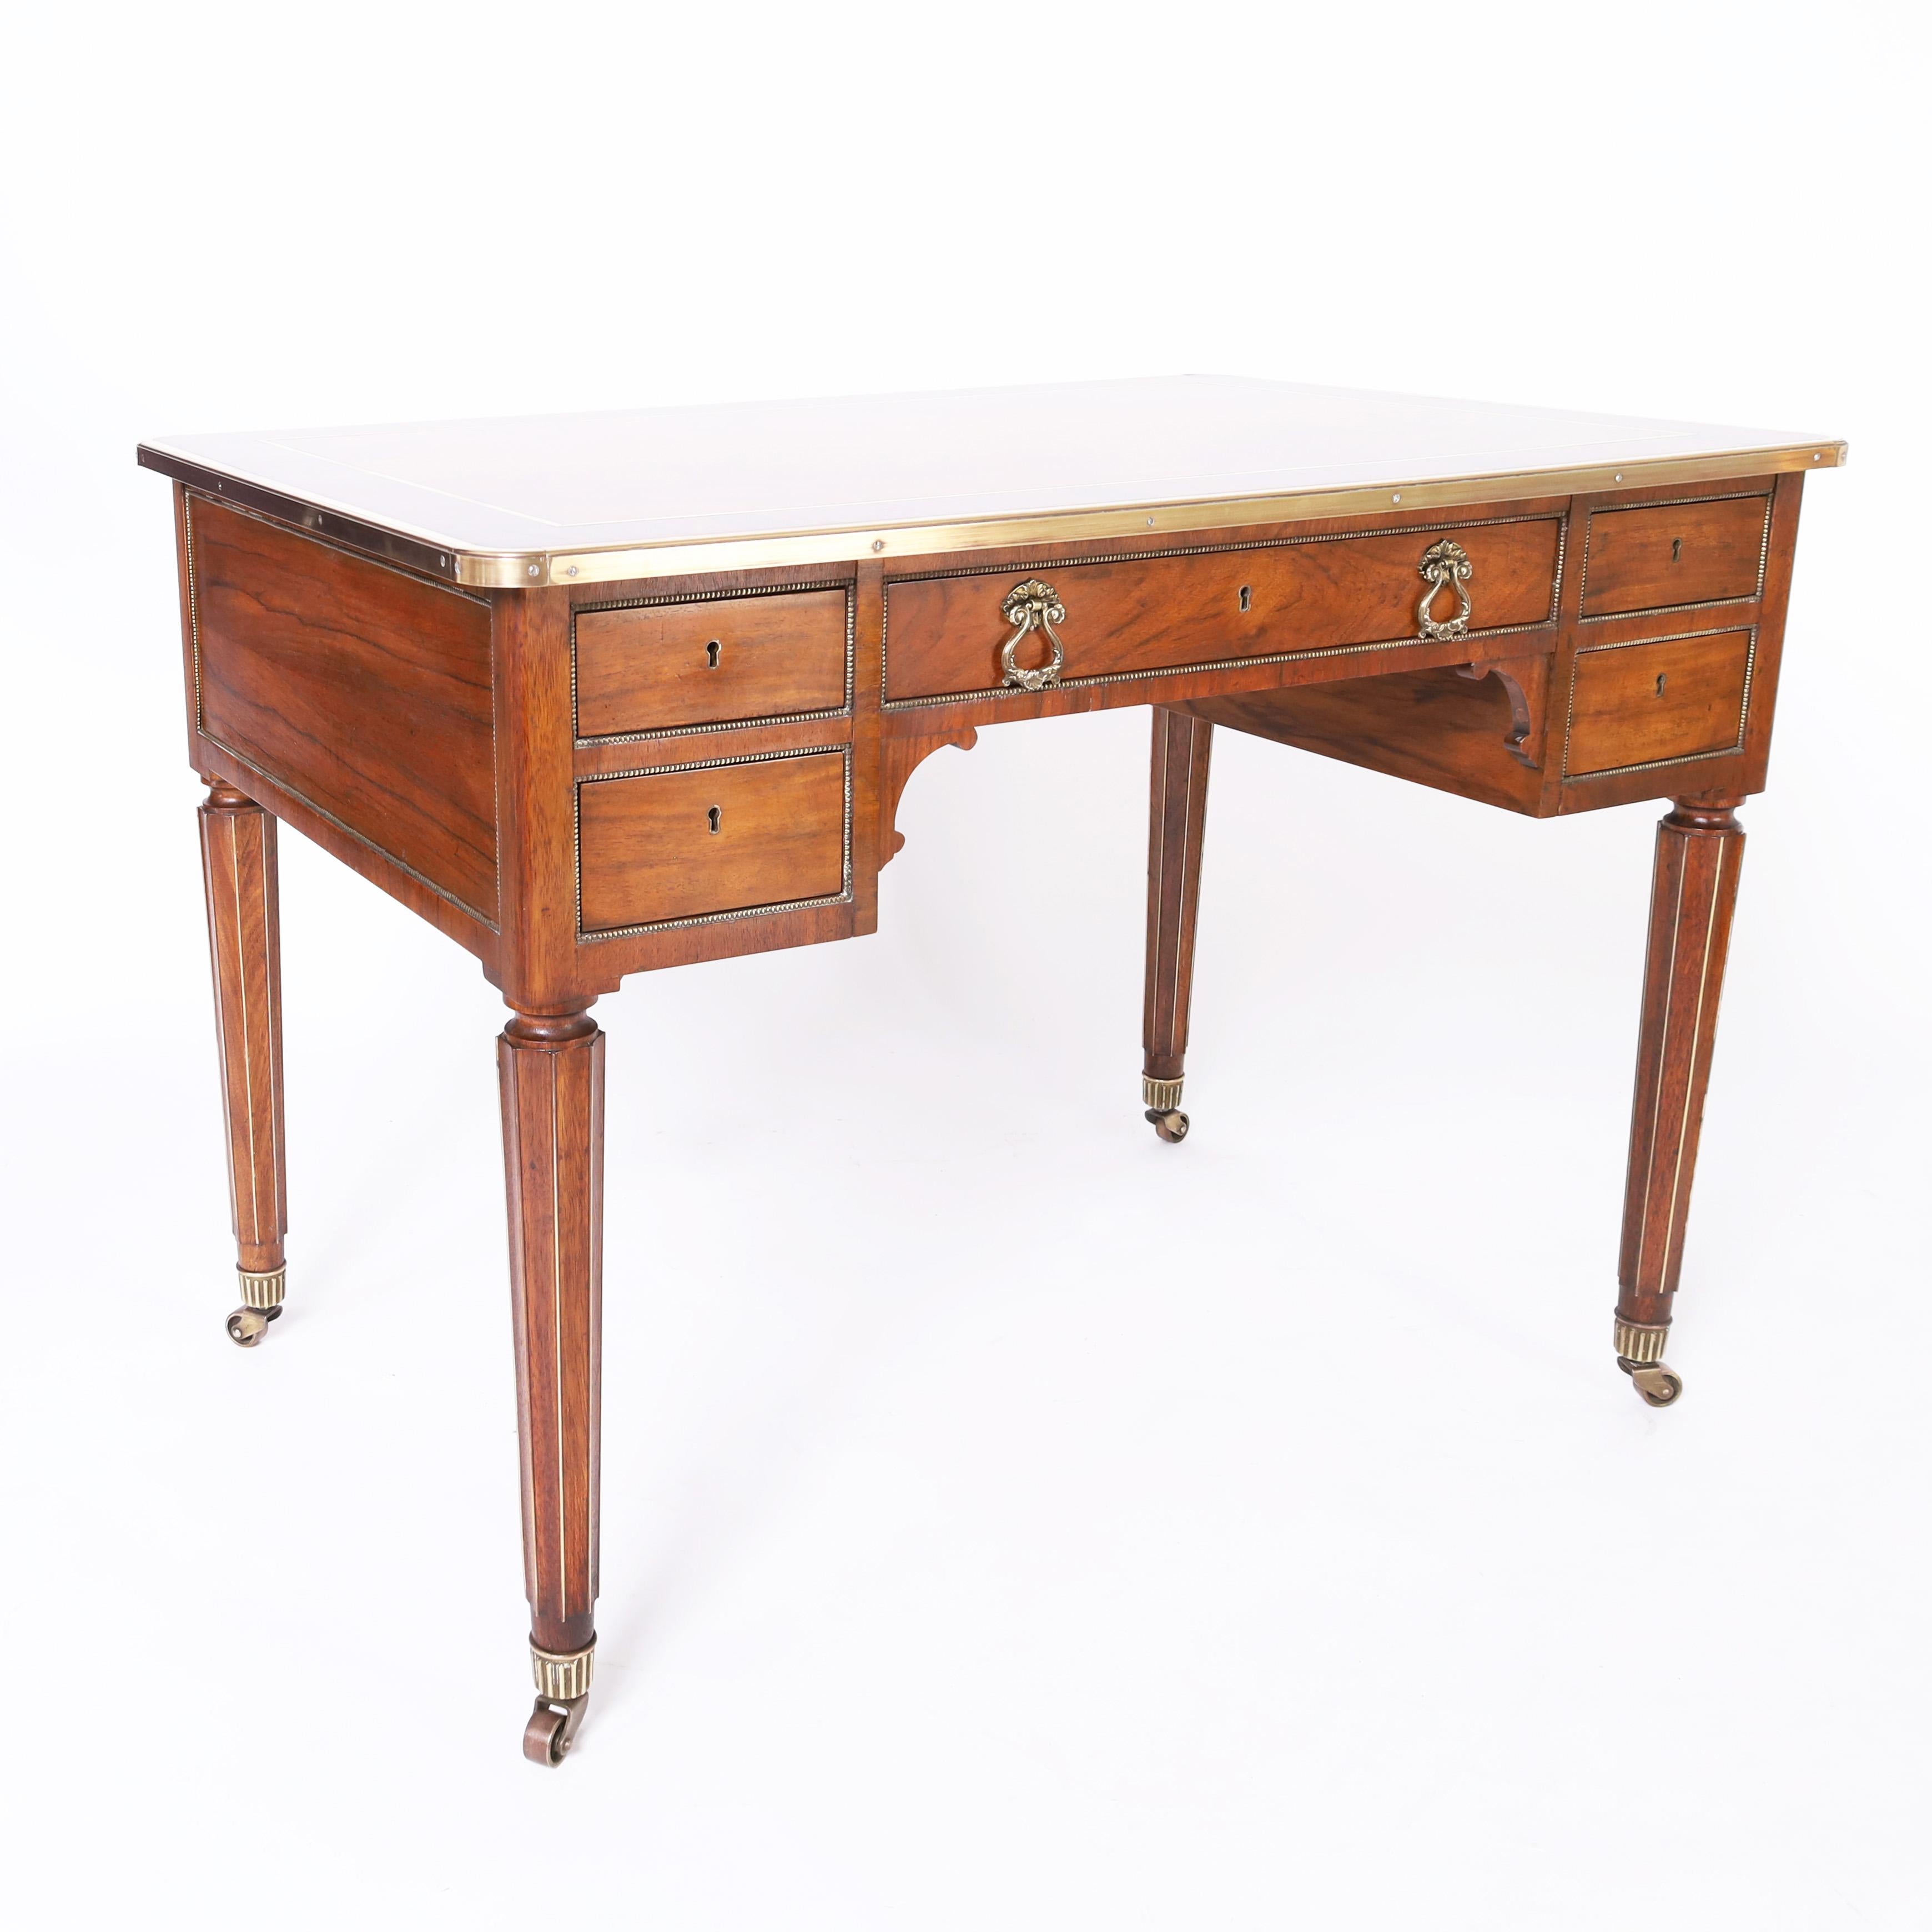 Impressive French writing desk having a dramatic mixed wood top crafted with a burled walnut center crossbanded in zebra wood with brass borders on  a mahogany case having five drawers with beaded brass borders supported by elegant art deco style